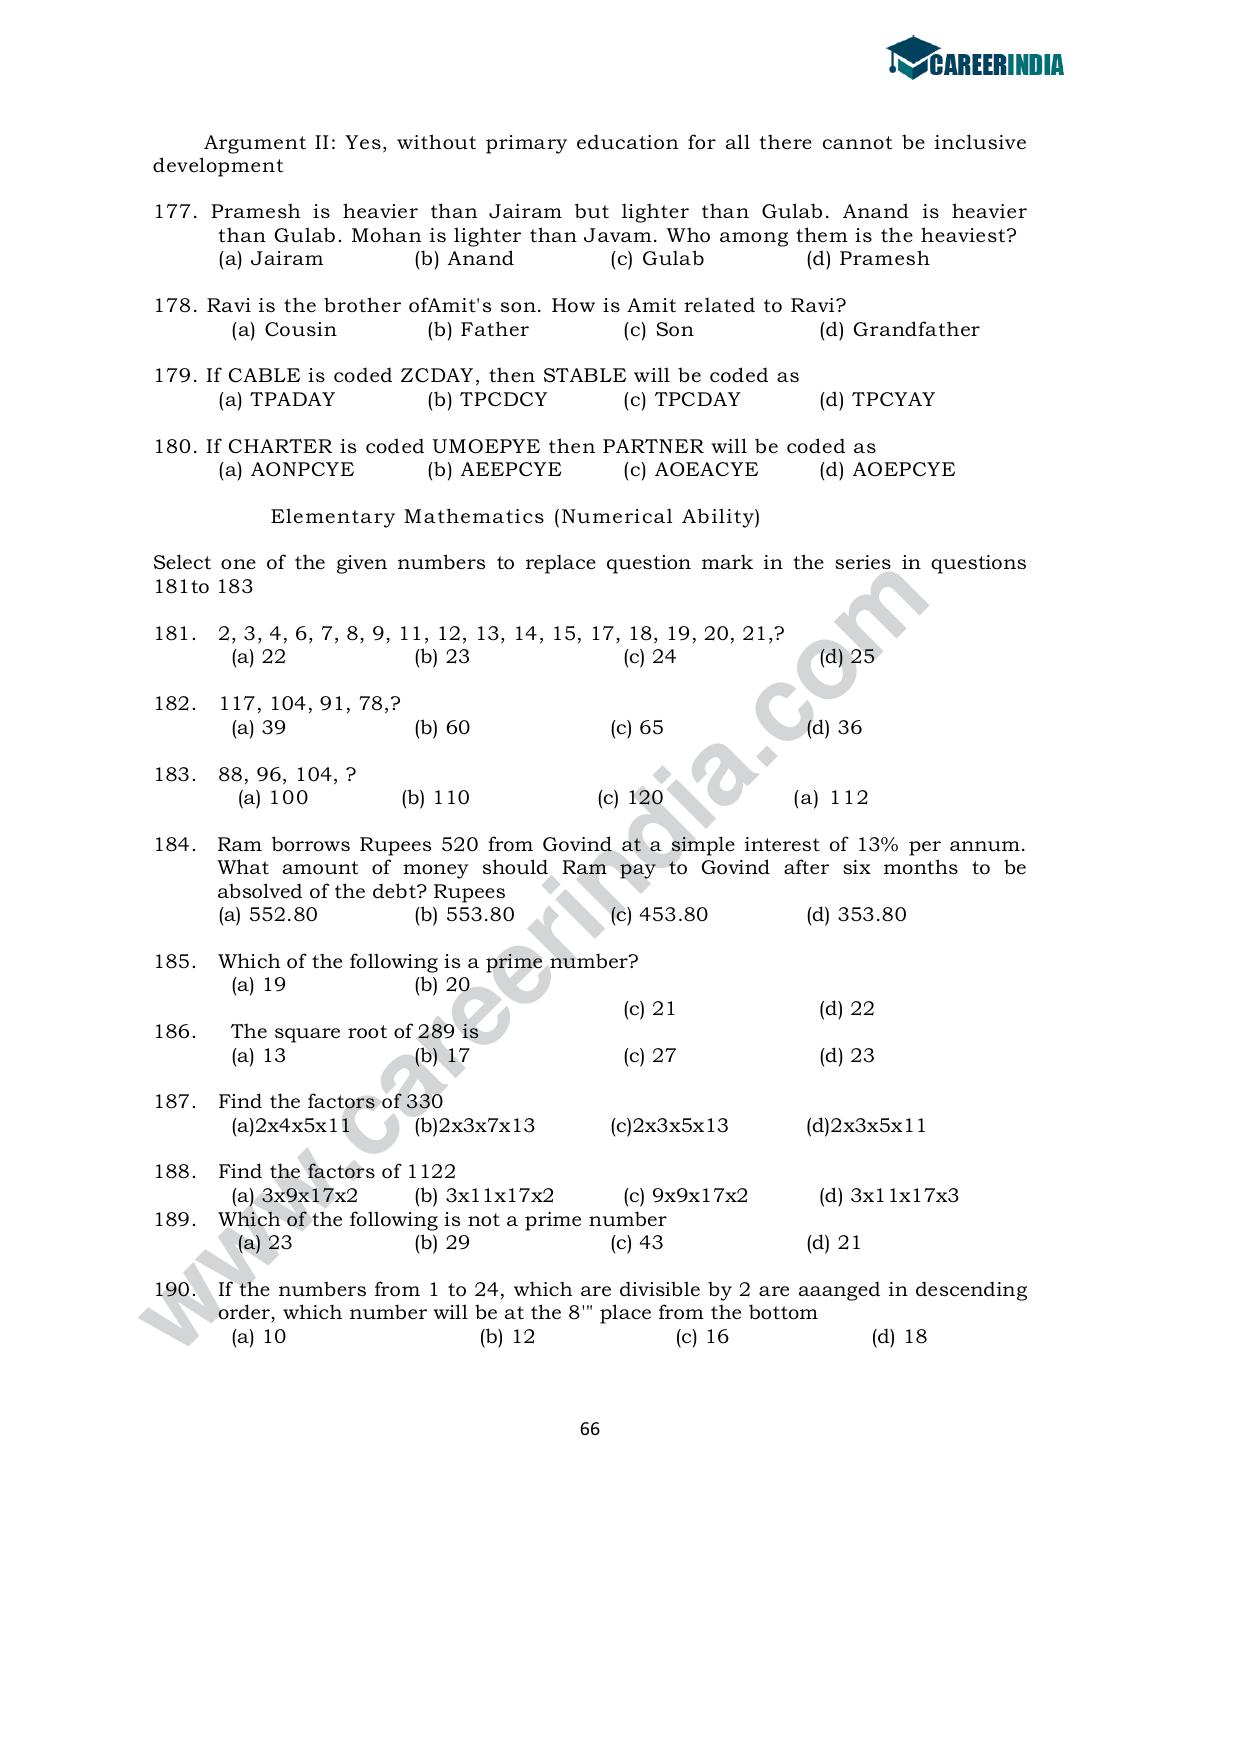 CLAT 2010 UG Sample Question Paper - Page 19